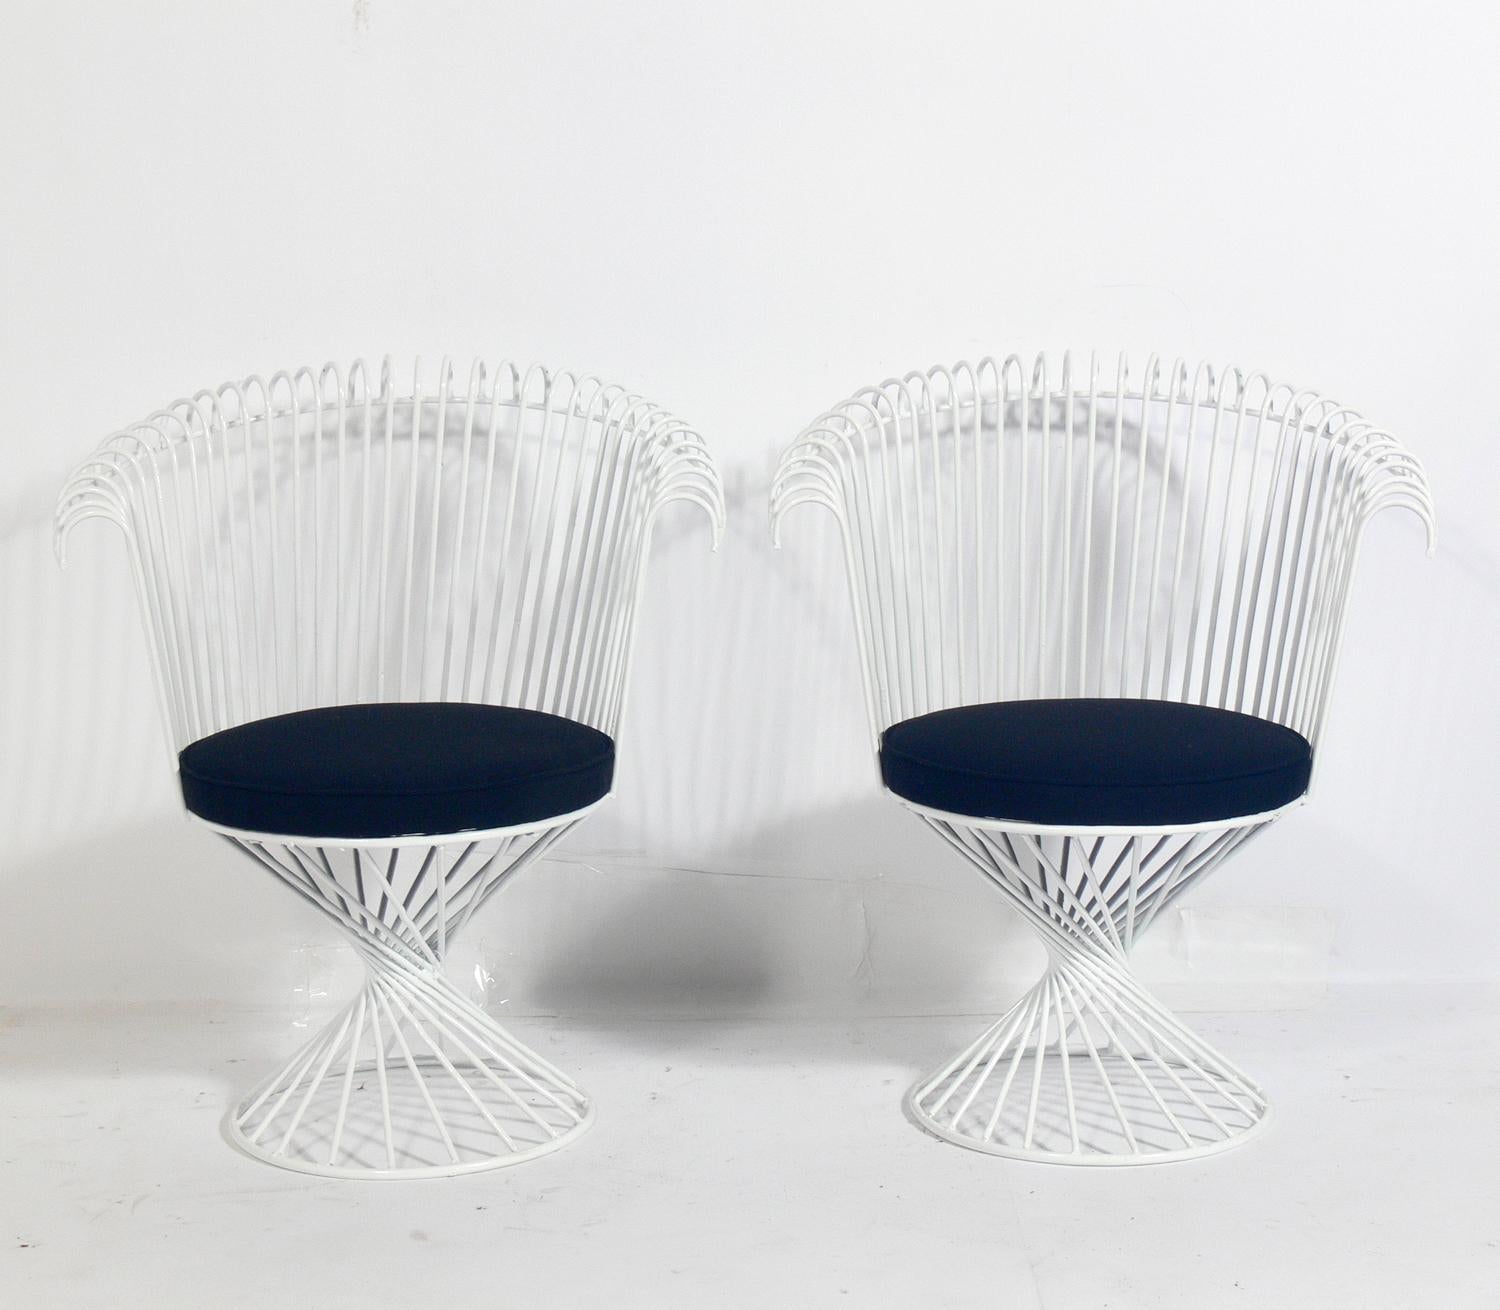 Sculptural patio chairs in the manner of Mathieu Matégot, France, circa 1960s. They have been recently powder-coated and reupholstered in an exterior grade fabric.